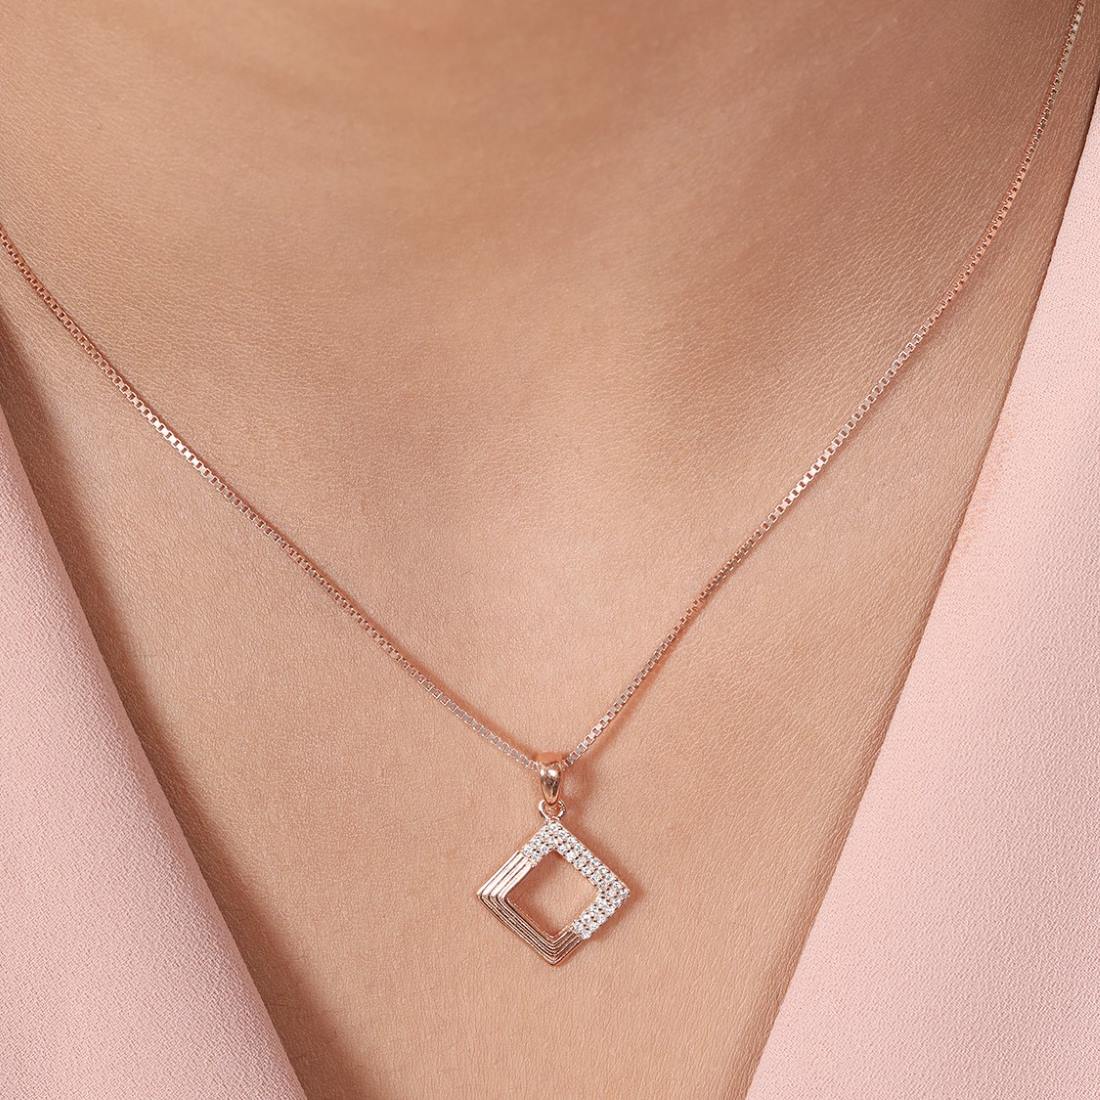 Square Sparkle Rose Gold Plated 925 Sterling Silver Pendant